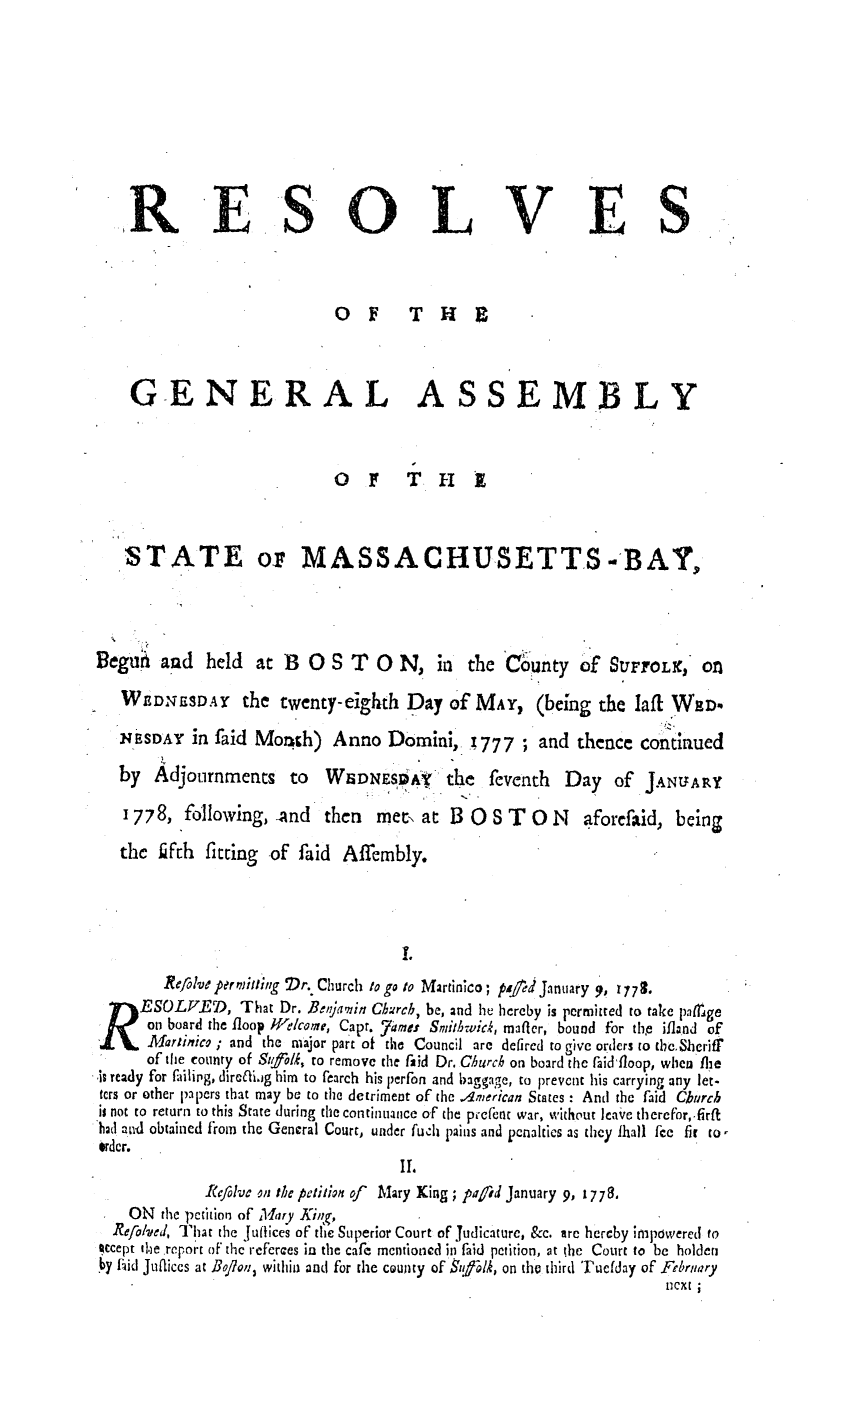 handle is hein.ssl/ssma0217 and id is 1 raw text is: RE S o

L

VES

OF T H

GENERAL

ASSEMBLY

OF T H 1
STATE oz MASSACHUSETTS.-BAY,

Beguii and held

at B 0 S T 0 N, in the County of StUrrOLX, On

WDNESDAY the twenty-eighth Day Of MAY, (being the Iafil WaD.
NEBSDAY in faid Month) Anno Domini, ;777; and thence contlaued
by   Adjournments       to   WEDNES A         the   feventh    Day    of JANUARY
1778, following, And        then    met, at B 0     S T   0 N    aforefaid, being
the ifth fitting of faid Affembly.
I.
Refolve perhtillig  Dr. Church to go to Martinico; peed January 9, 1779.
ESOLVEAD, That Dr. Beitjanin Chircb, be, and he hereby is permitted to take pafrige
on board the tloop W1elcome, Capt. 7 ame. Smithwick, mafler, bound for thb ifland of
Mariinico ; and the major part of tho Council are defired to give orders to the.,Shcriff
of the county of Sufl/k, to remove the faid Dr. Church on board the raid'floop, when flie
IS ready for failirg, diraffi-g him to fearch his perfon and baggage, to prevent his carrying any let-
ters or other papers that may be to the detriment of the American States - Anti the faid Church
is not to return to this State during the continuance of the pce(et war, without leave therefor,.firft
had and obtained firom the General Court, under fuch pains and penalties as they Ihall fee fit to-
order.
II'
ReRfolve on the petition of Mary King ; piafid January 9, 1778.
ON the petition of Mary Kig,
Refo/'lved That the juffices of the Superior Court of Tudicature, &c. are hereby irnpdwered to
ocept the report of thc referces in the cafe mentioned ini faid petition, at the Court to be holden
y id Jufliccs at Bo/Ion, within and for the county of SitPlh, on tho third 'Fucfday of Frbrnary
next


